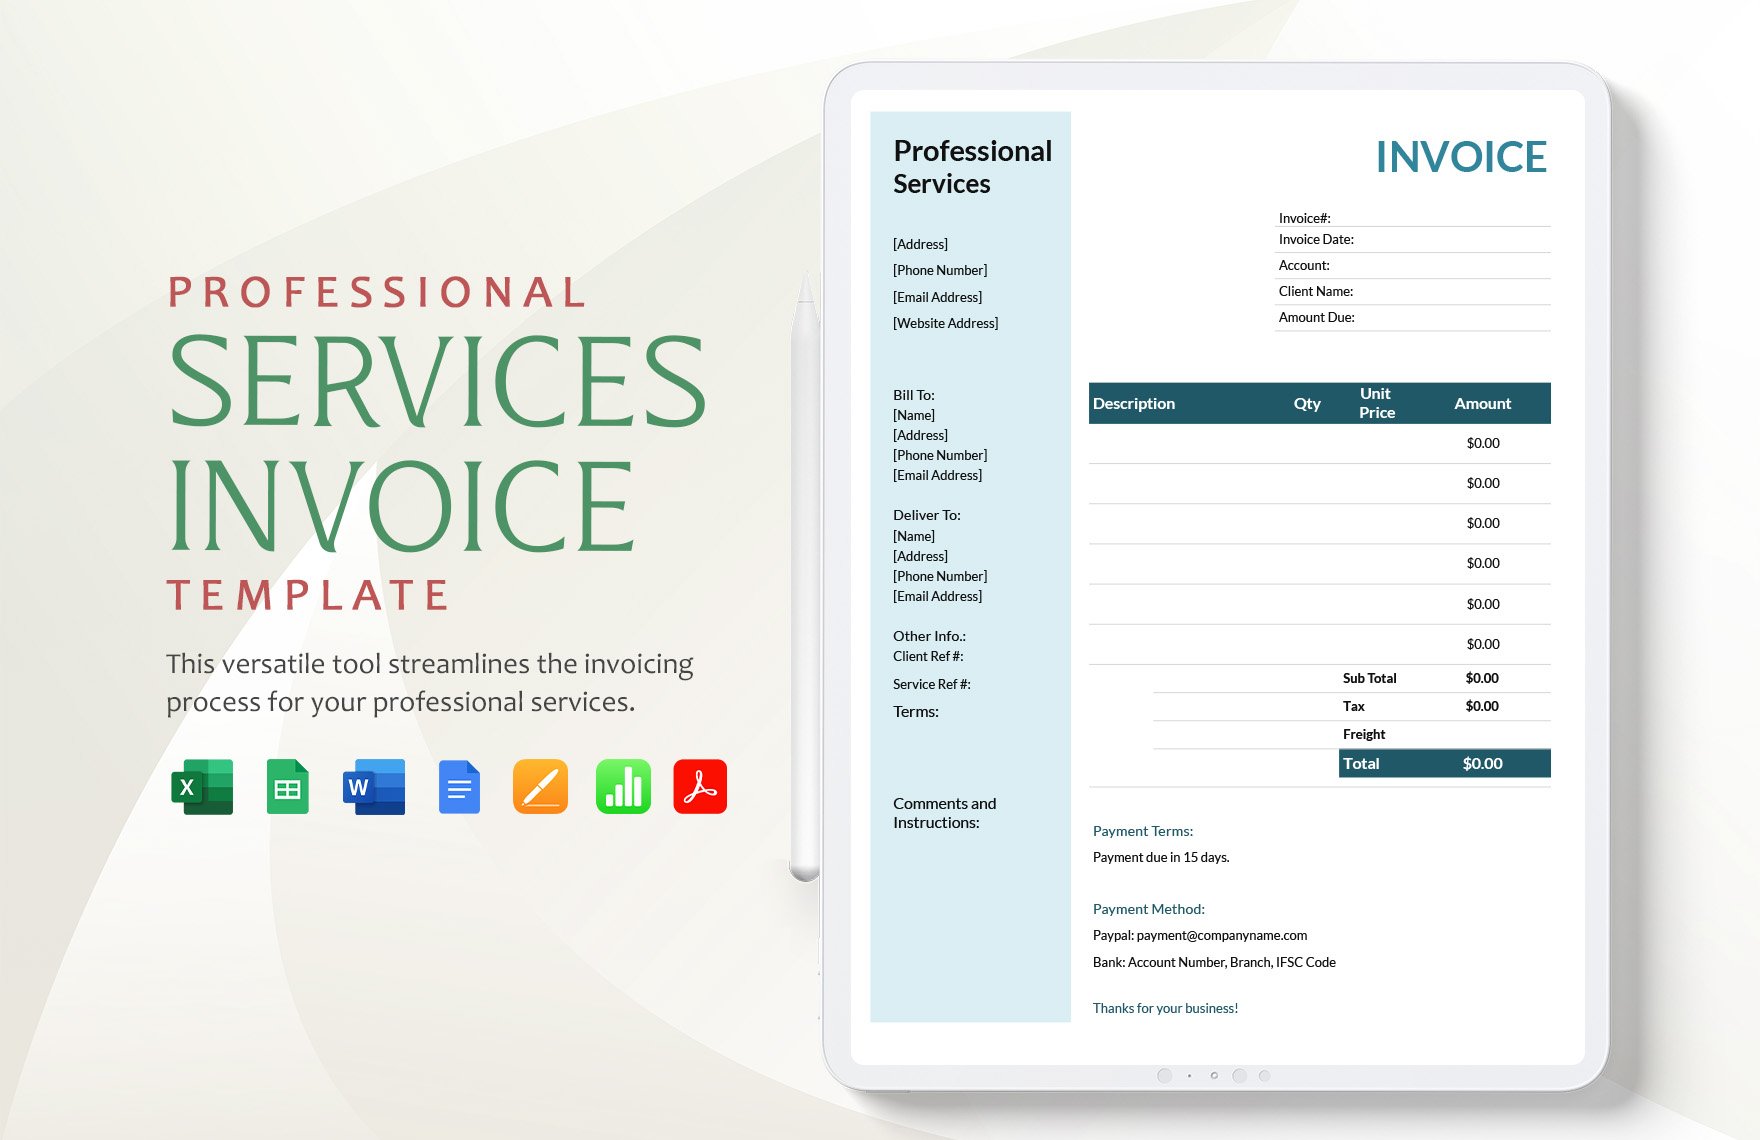 Professional Services Invoice Template in Word, Google Docs, Excel, PDF, Google Sheets, Apple Pages, Apple Numbers